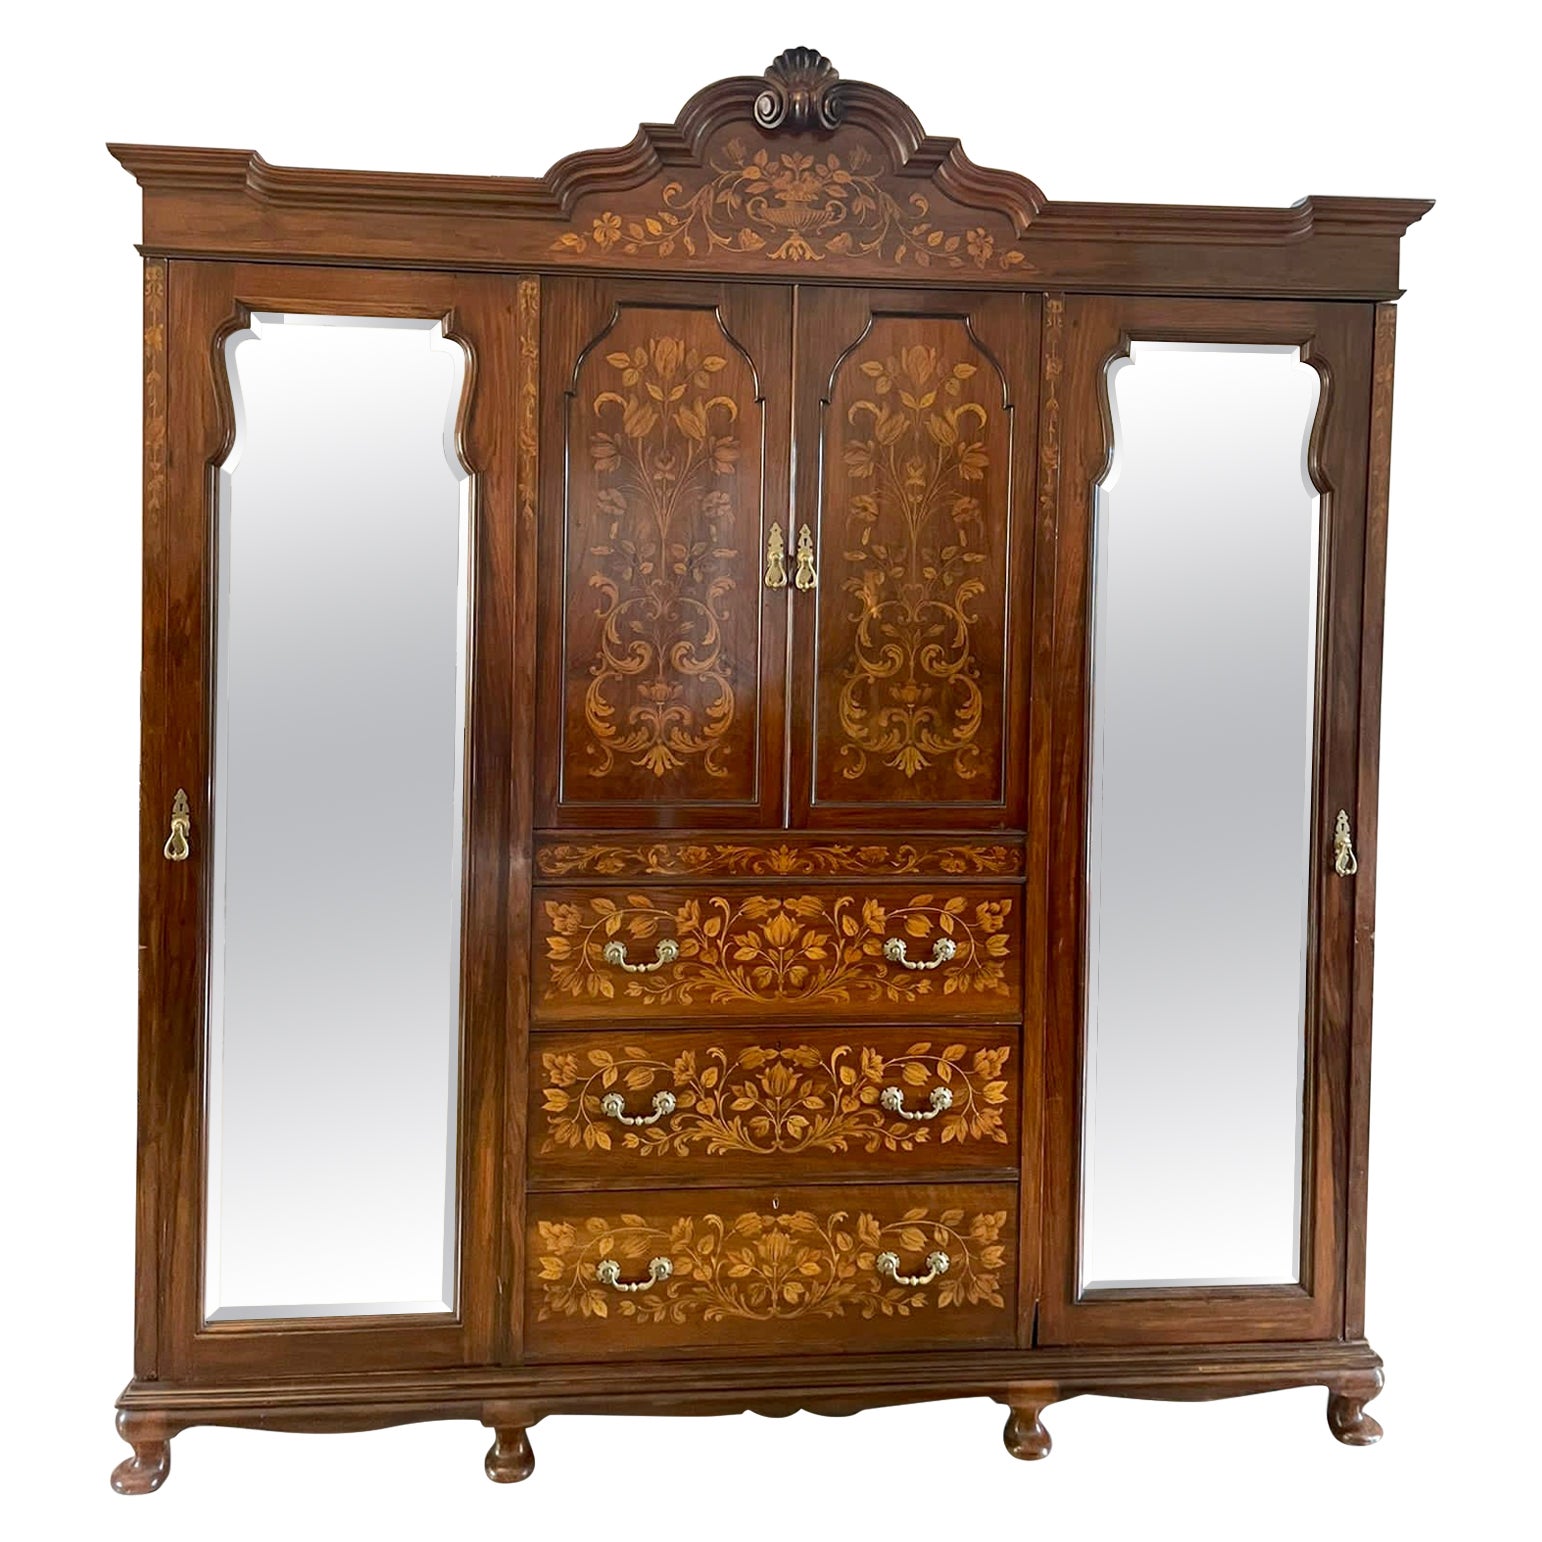 Outstanding Quality Large Antique Figured Walnut Marquetry Inlaid Wardrobe For Sale